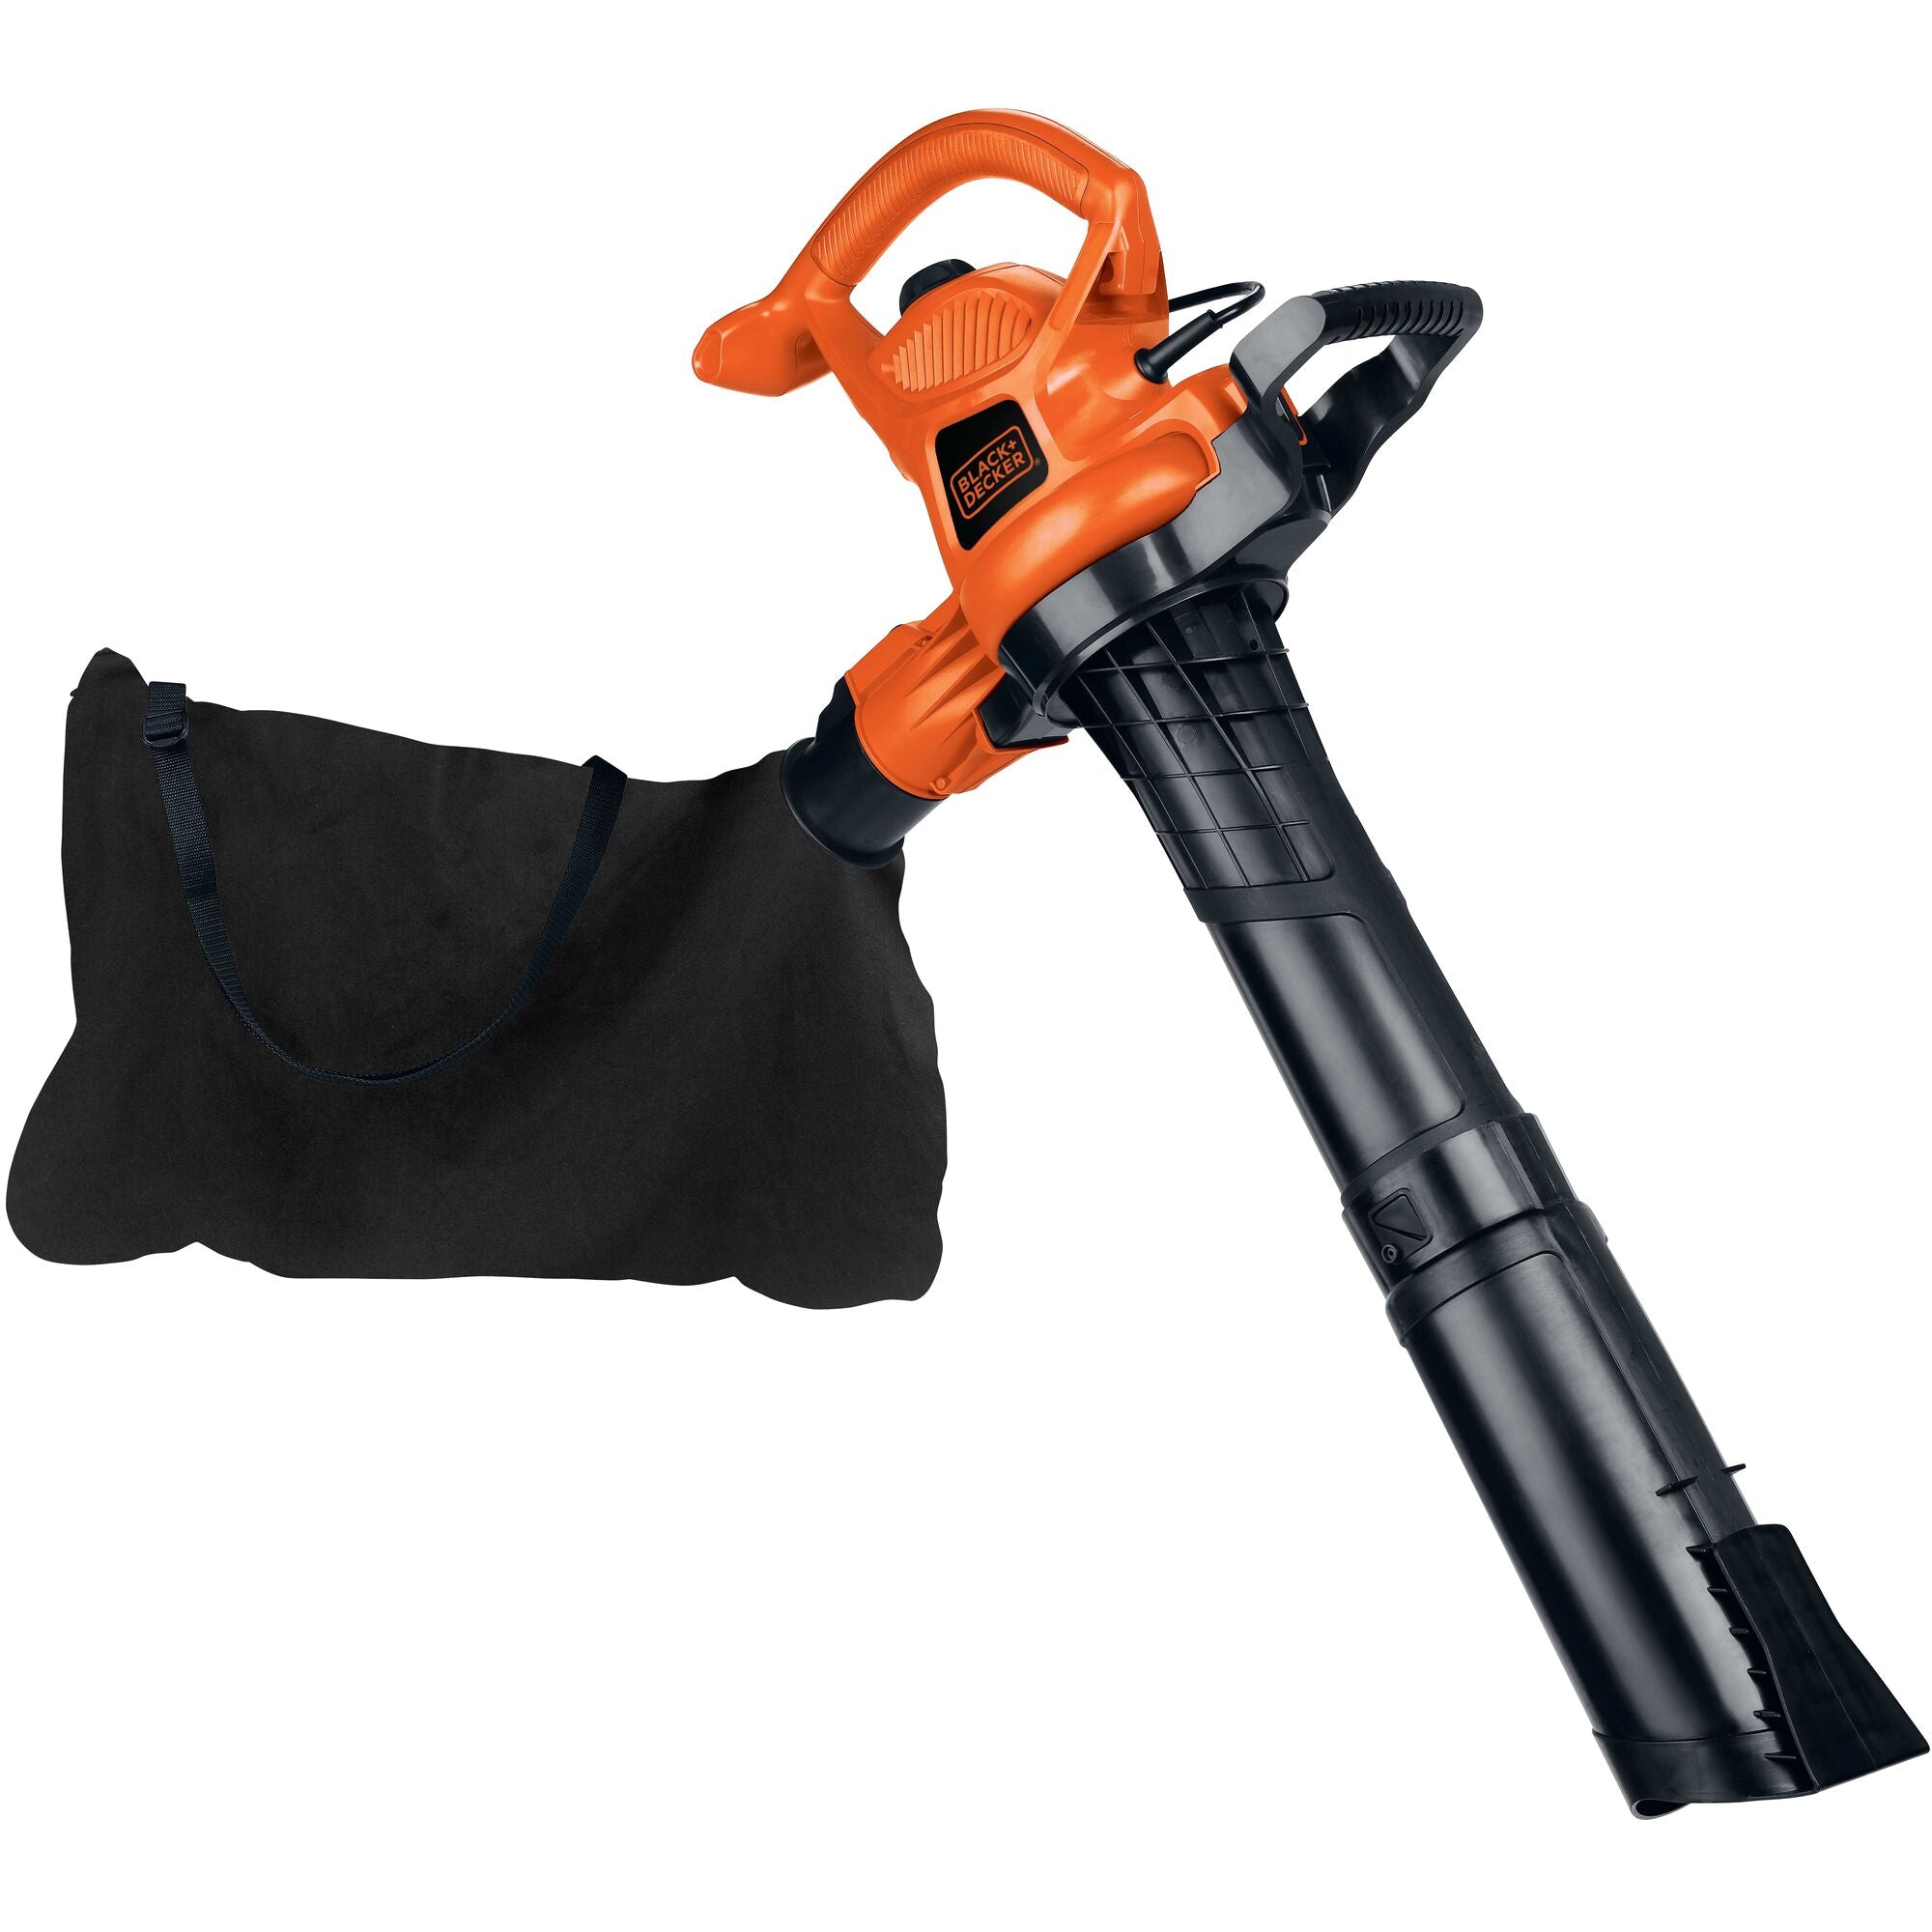 How to Change the Leaf Blower From Vacuum to Blower